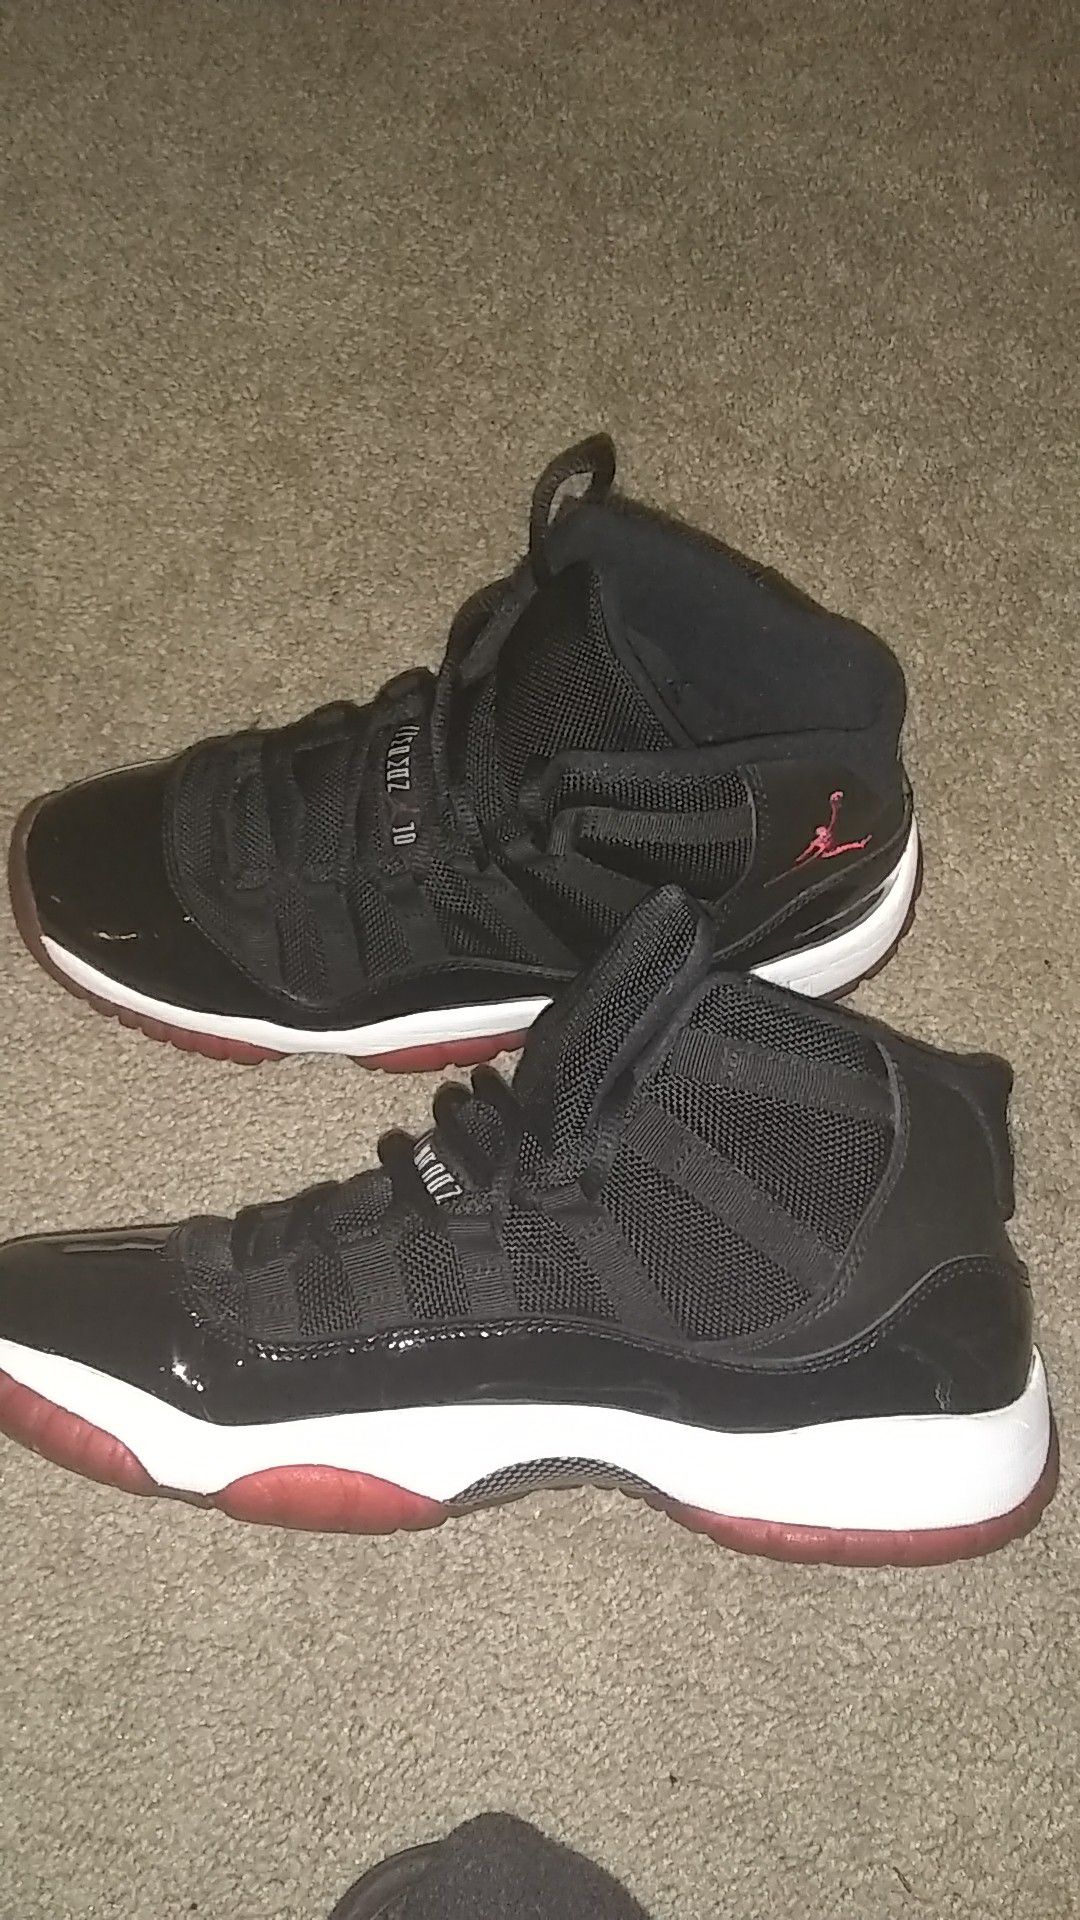 Bred 11's size 7